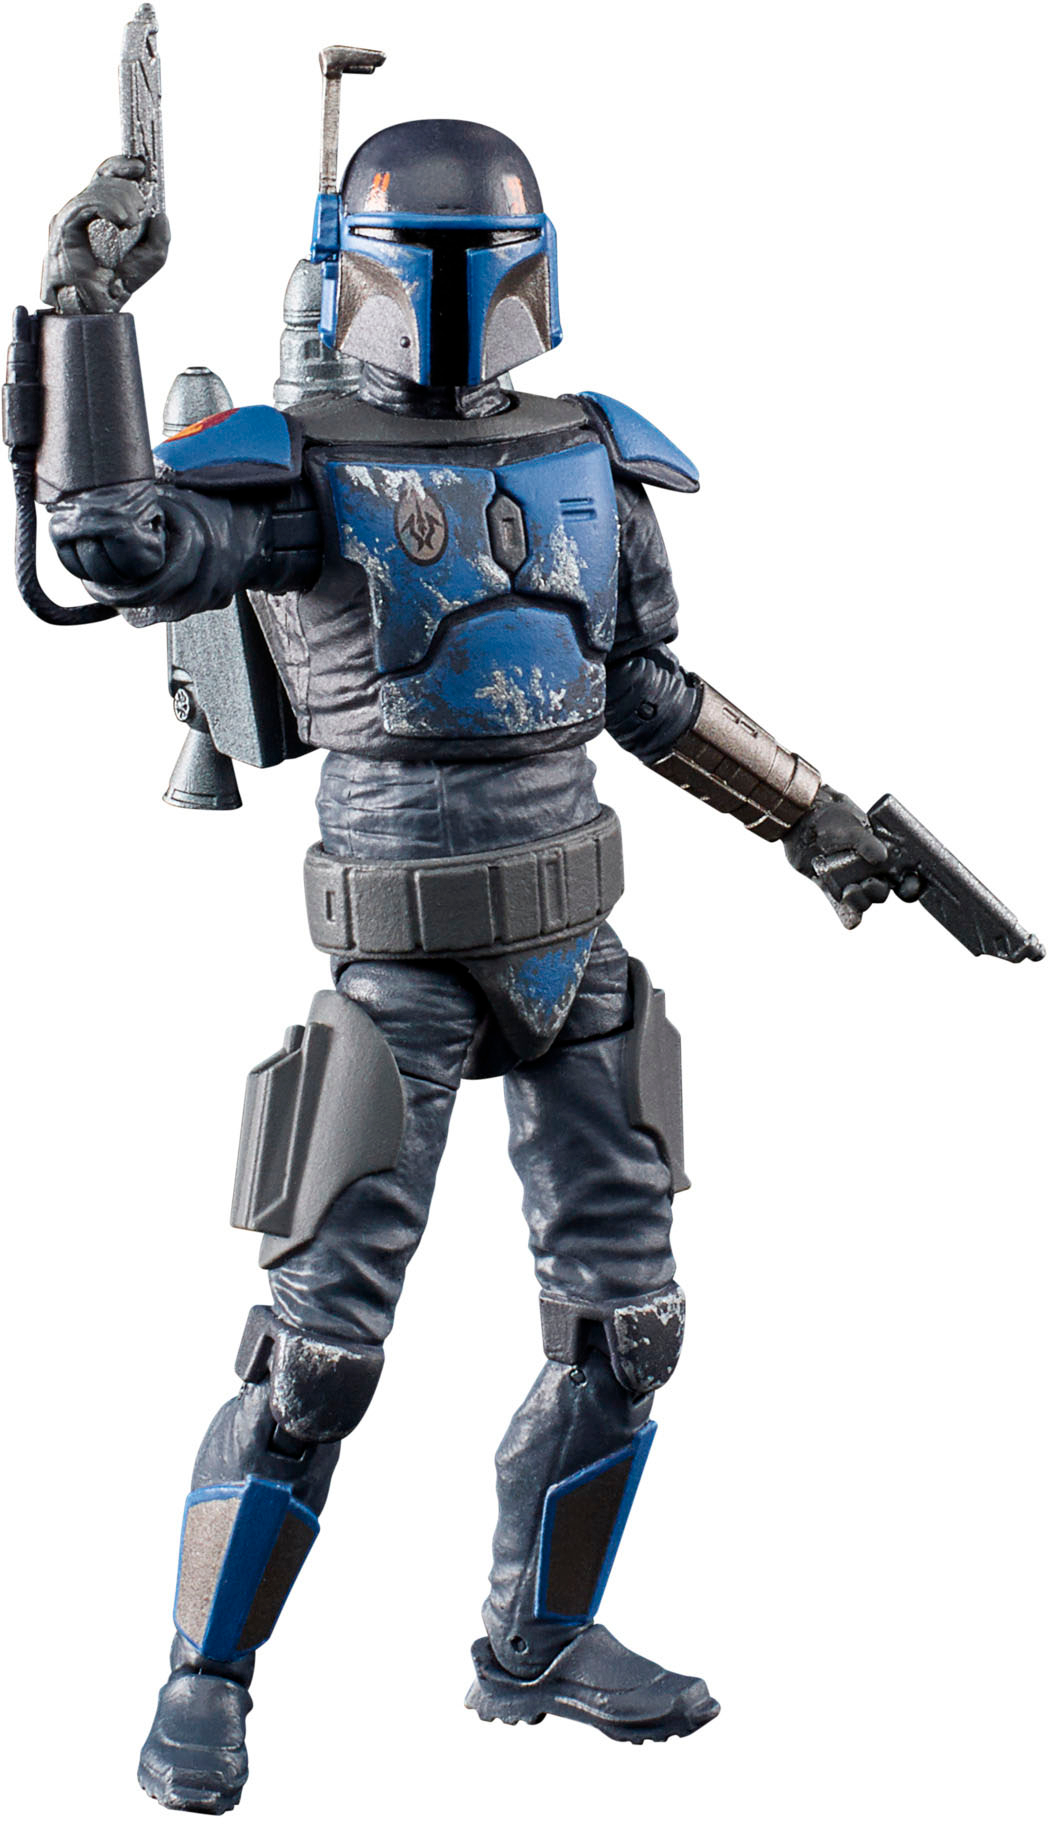 Angle View: Star Wars The Vintage Collection Mandalorian Death Watch Airborne Trooper